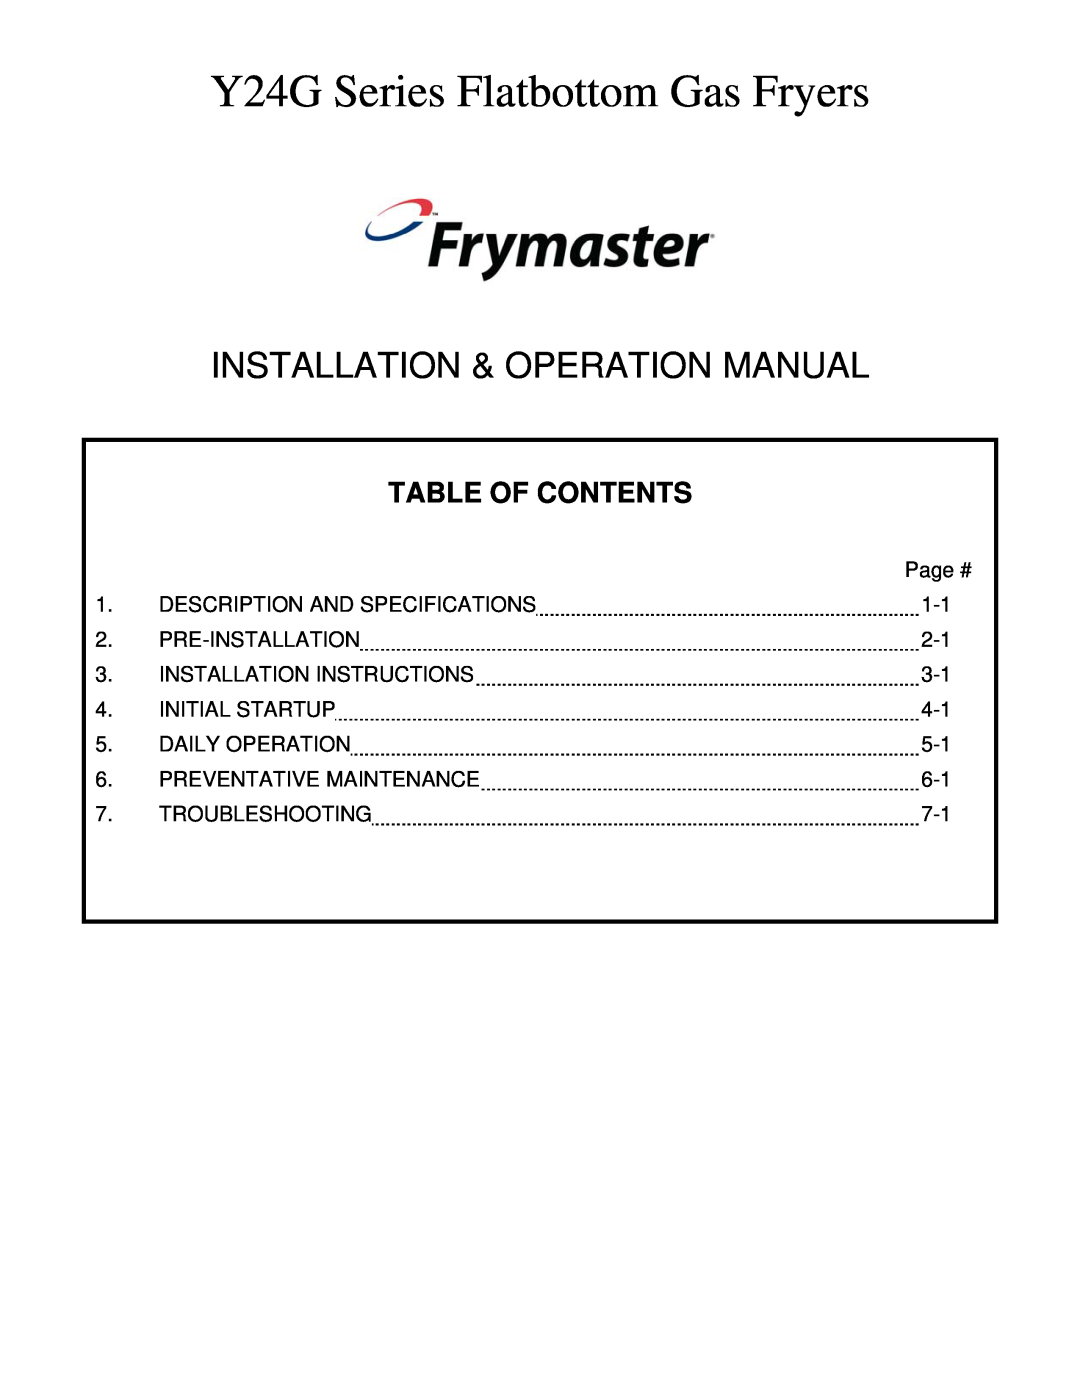 Frymaster YSCFC24 operation manual Table Of Contents, Y24G Series Flatbottom Gas Fryers 